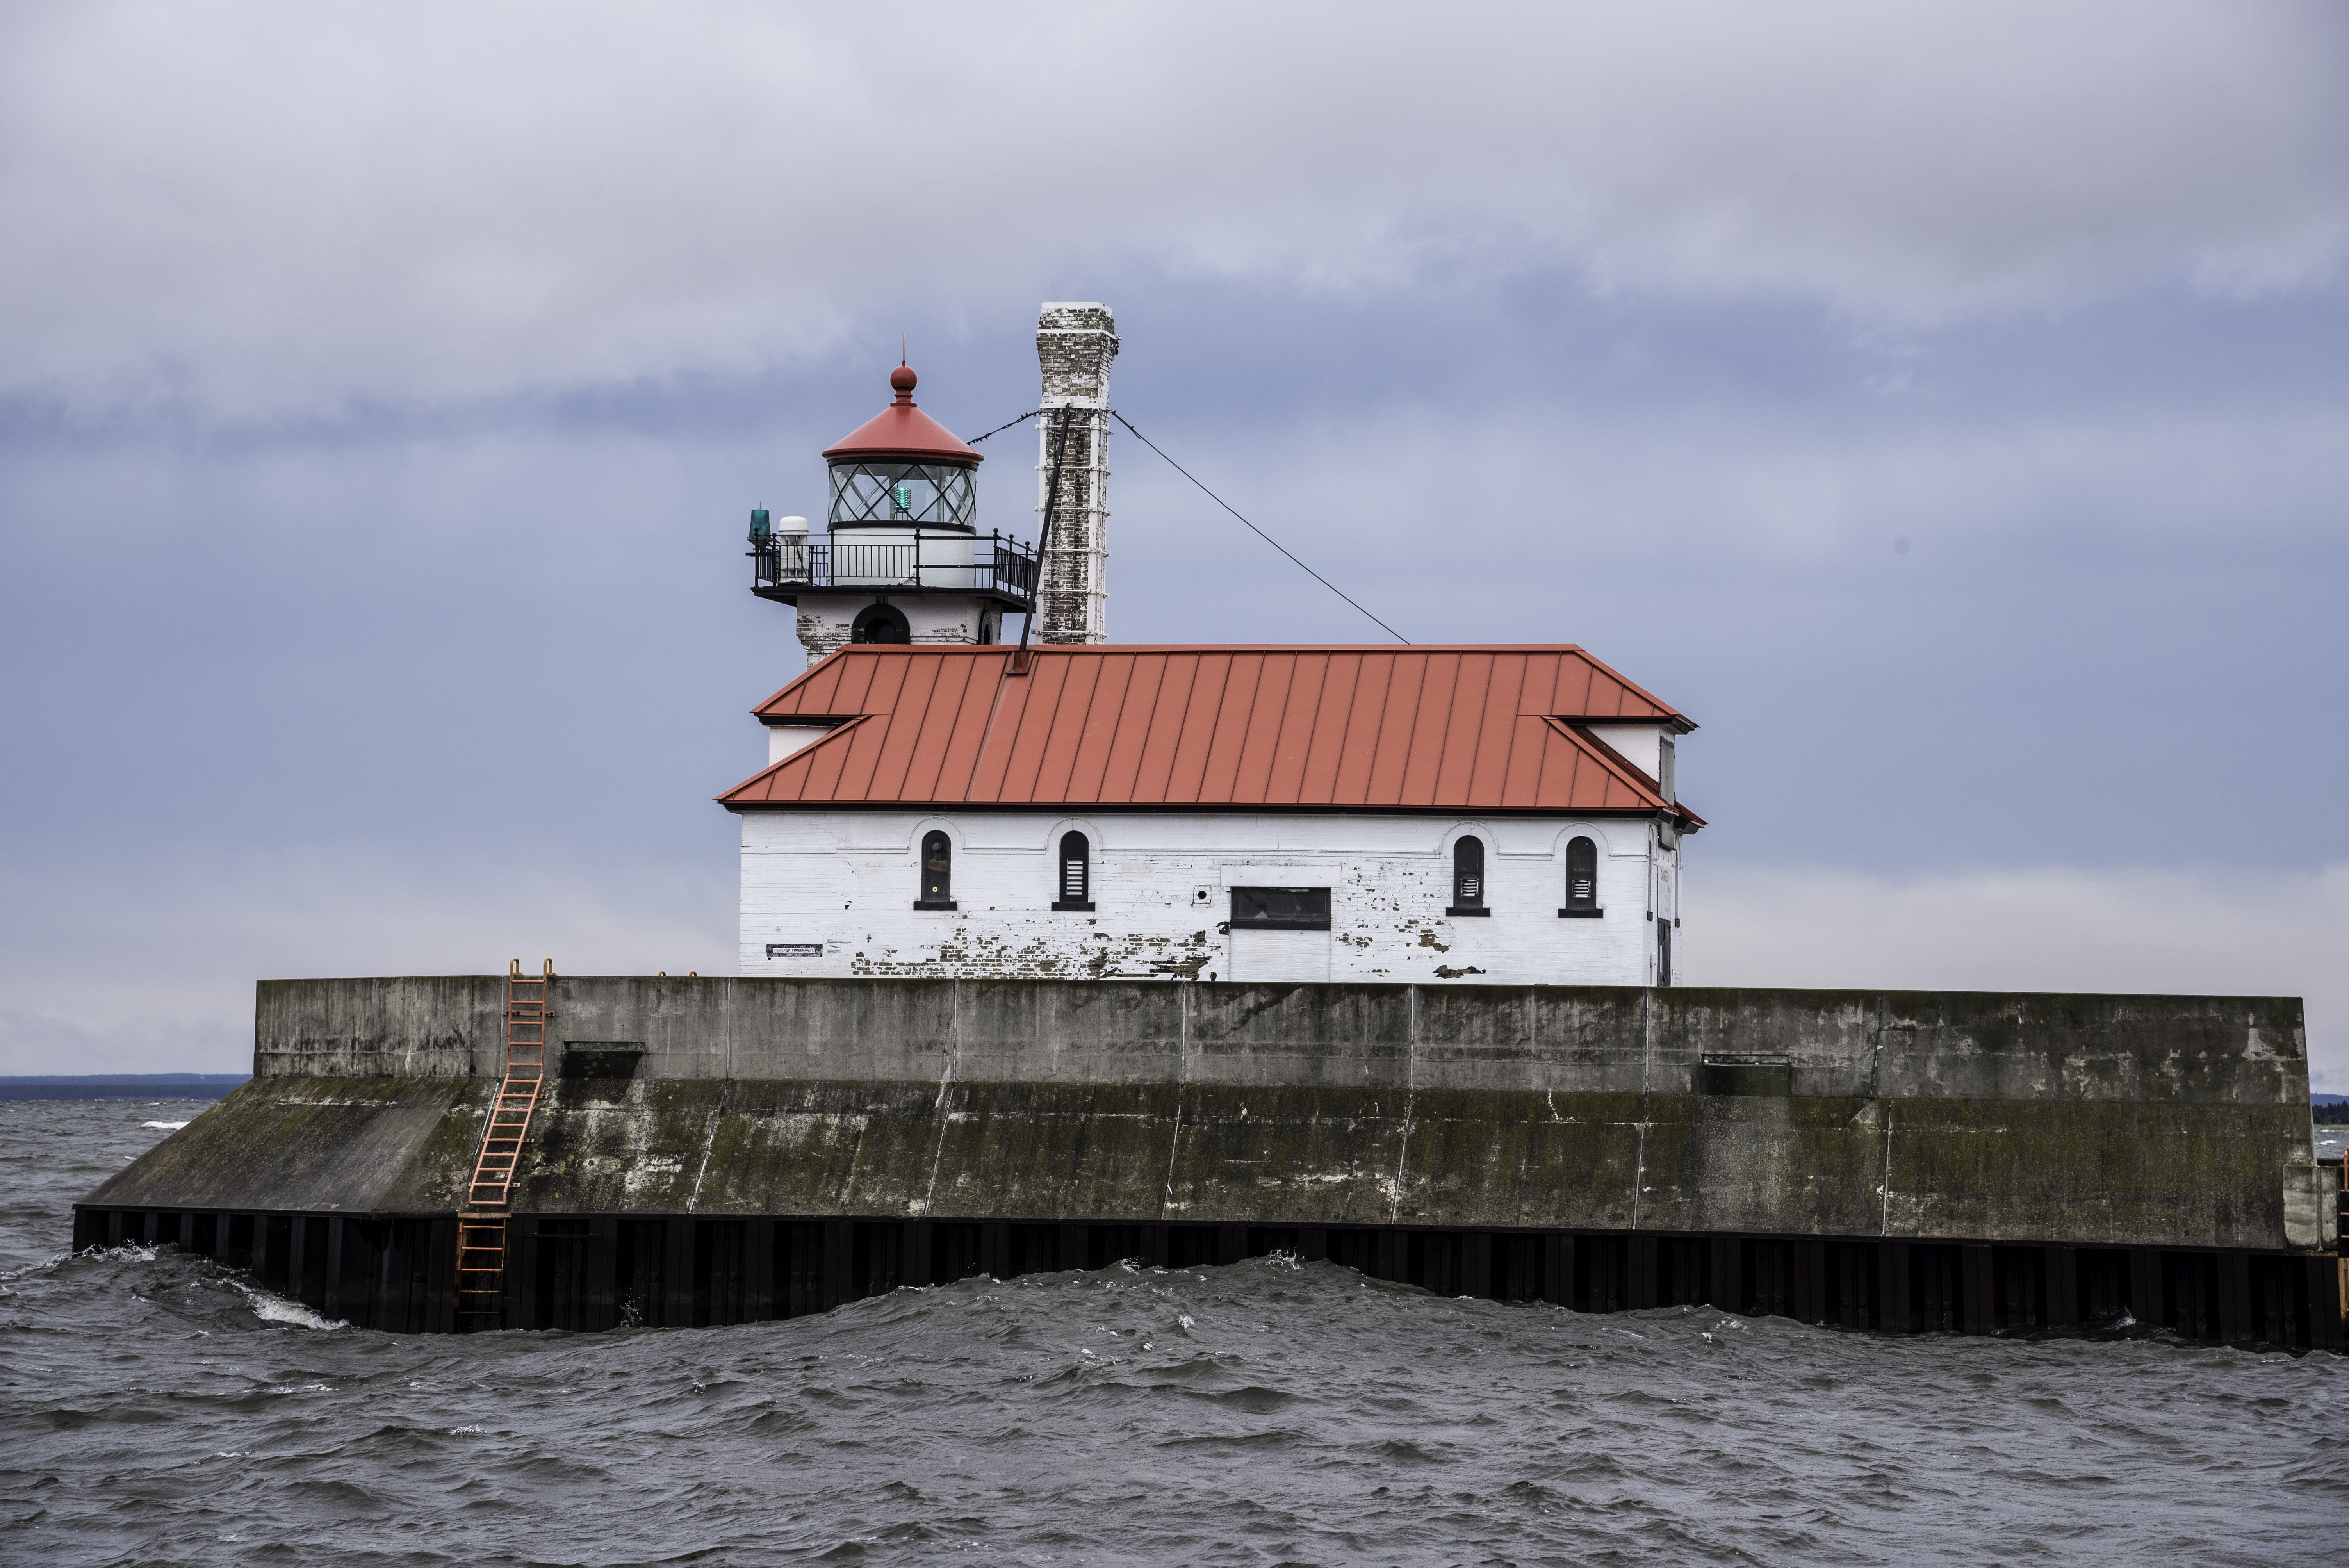 Lighthouse closeup on the Pier in Duluth, Minnesota, building